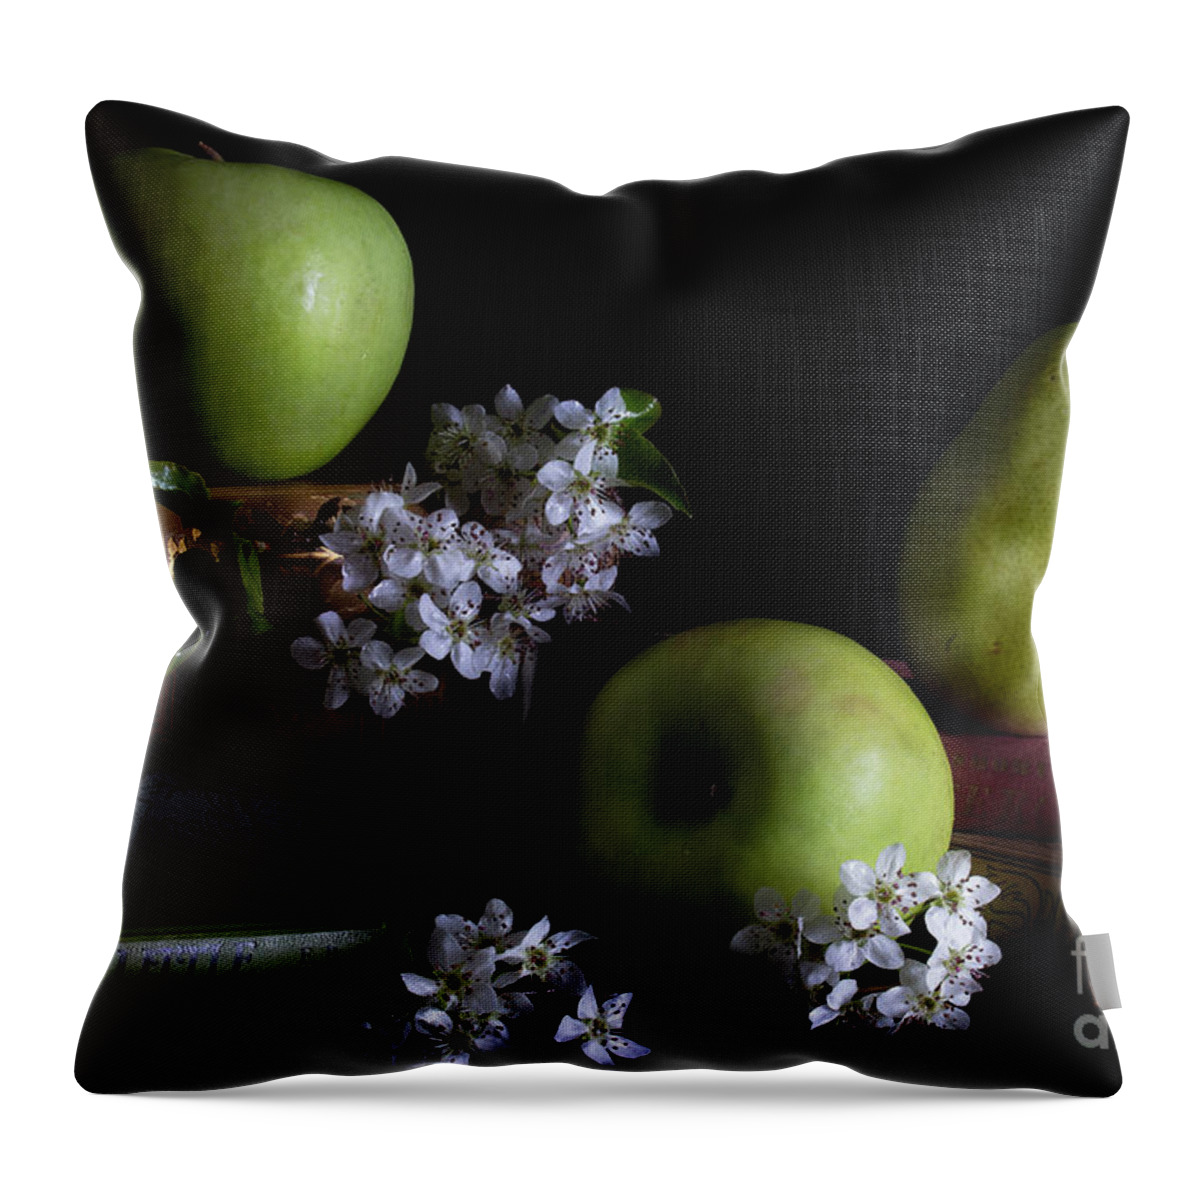 Pear Throw Pillow featuring the photograph Two Apples And A Pear by Mike Eingle